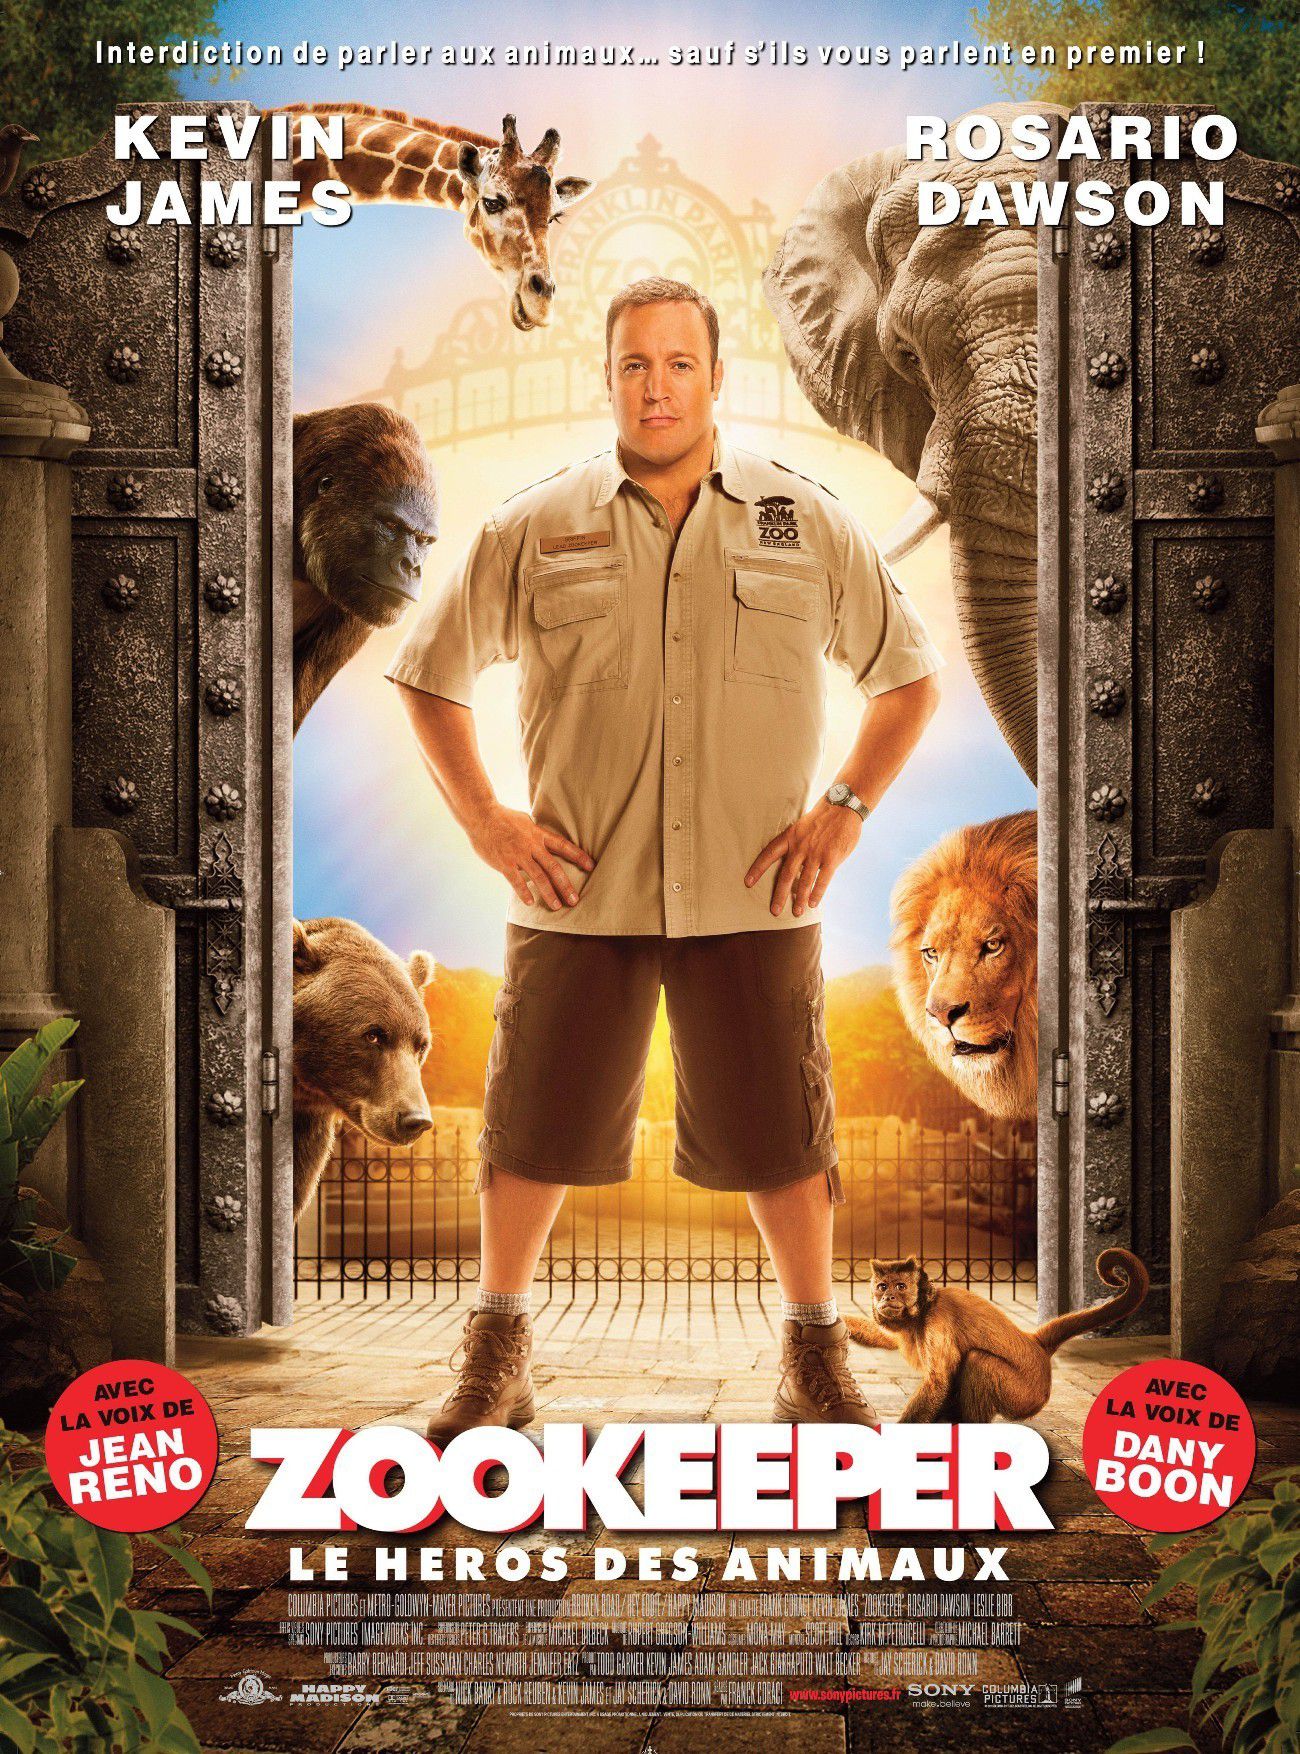 Zookeeper, le héros des animaux - Film (2011) streaming VF gratuit complet